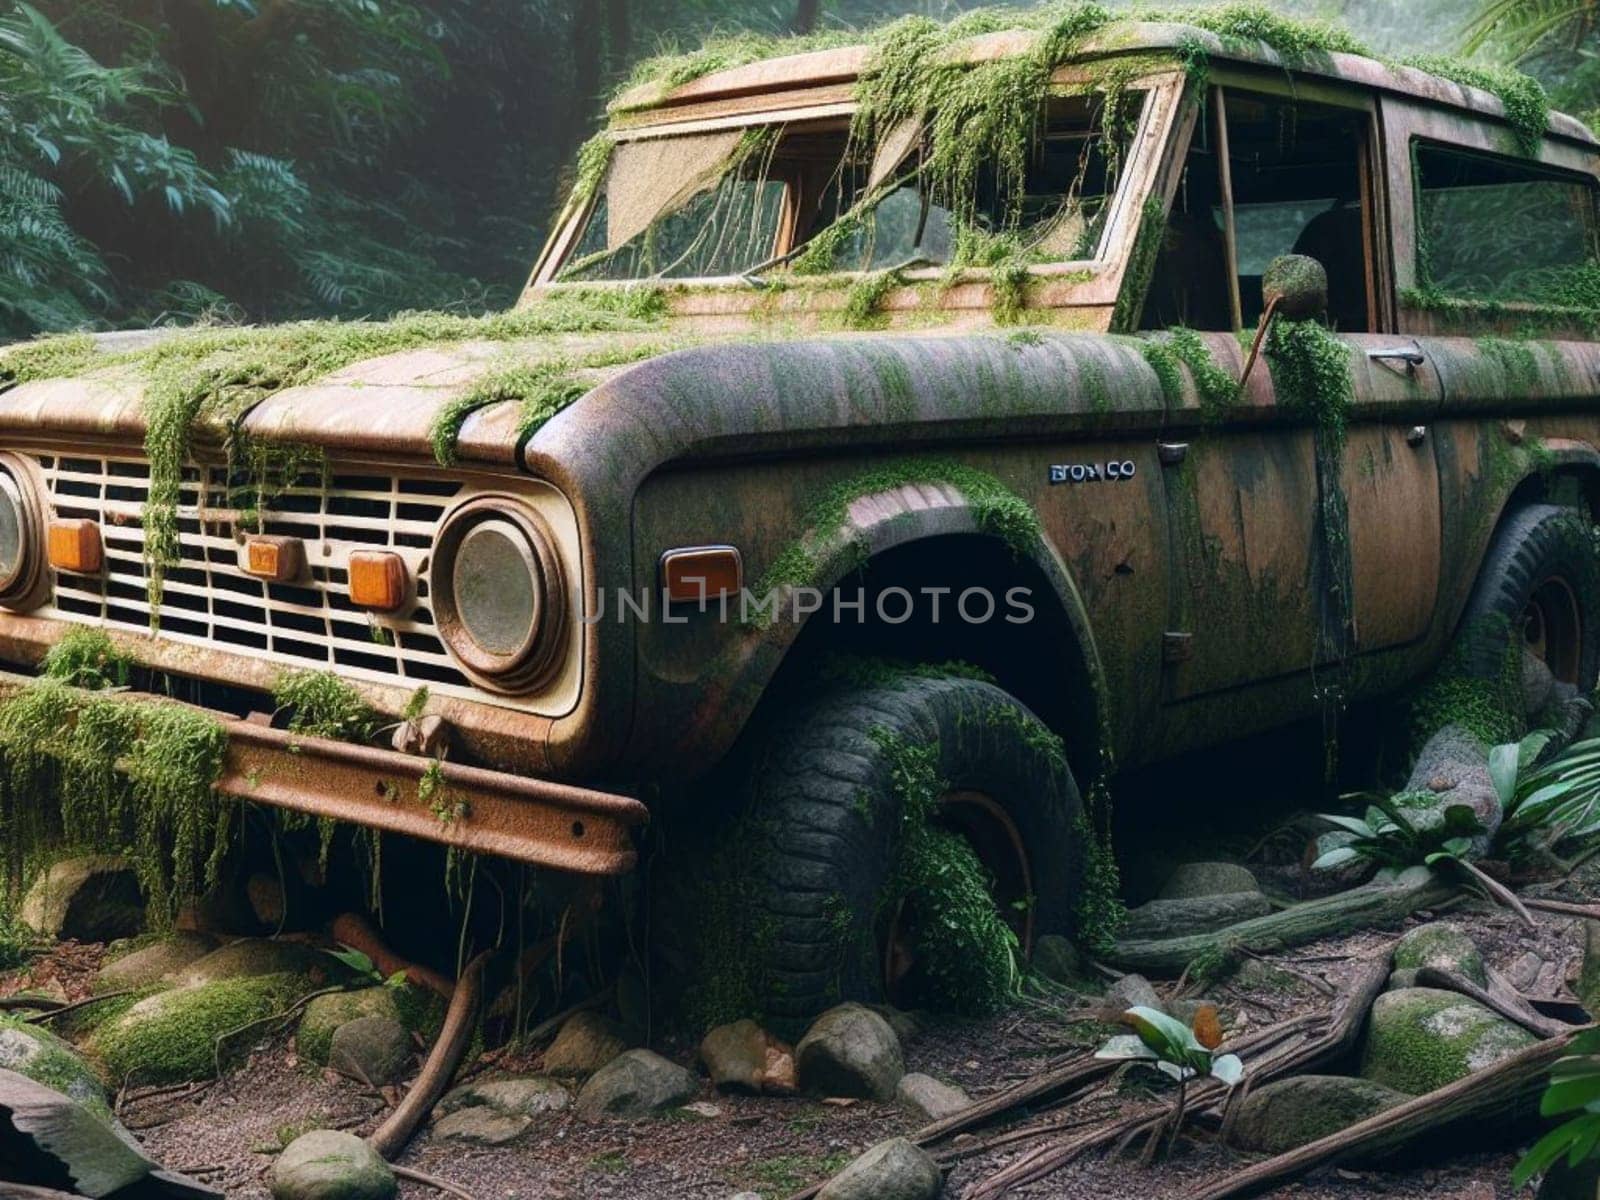 Abandoned rusty petrol luxury suv banned for co2 emission agenda, overgrowth plants bloom flowers by verbano